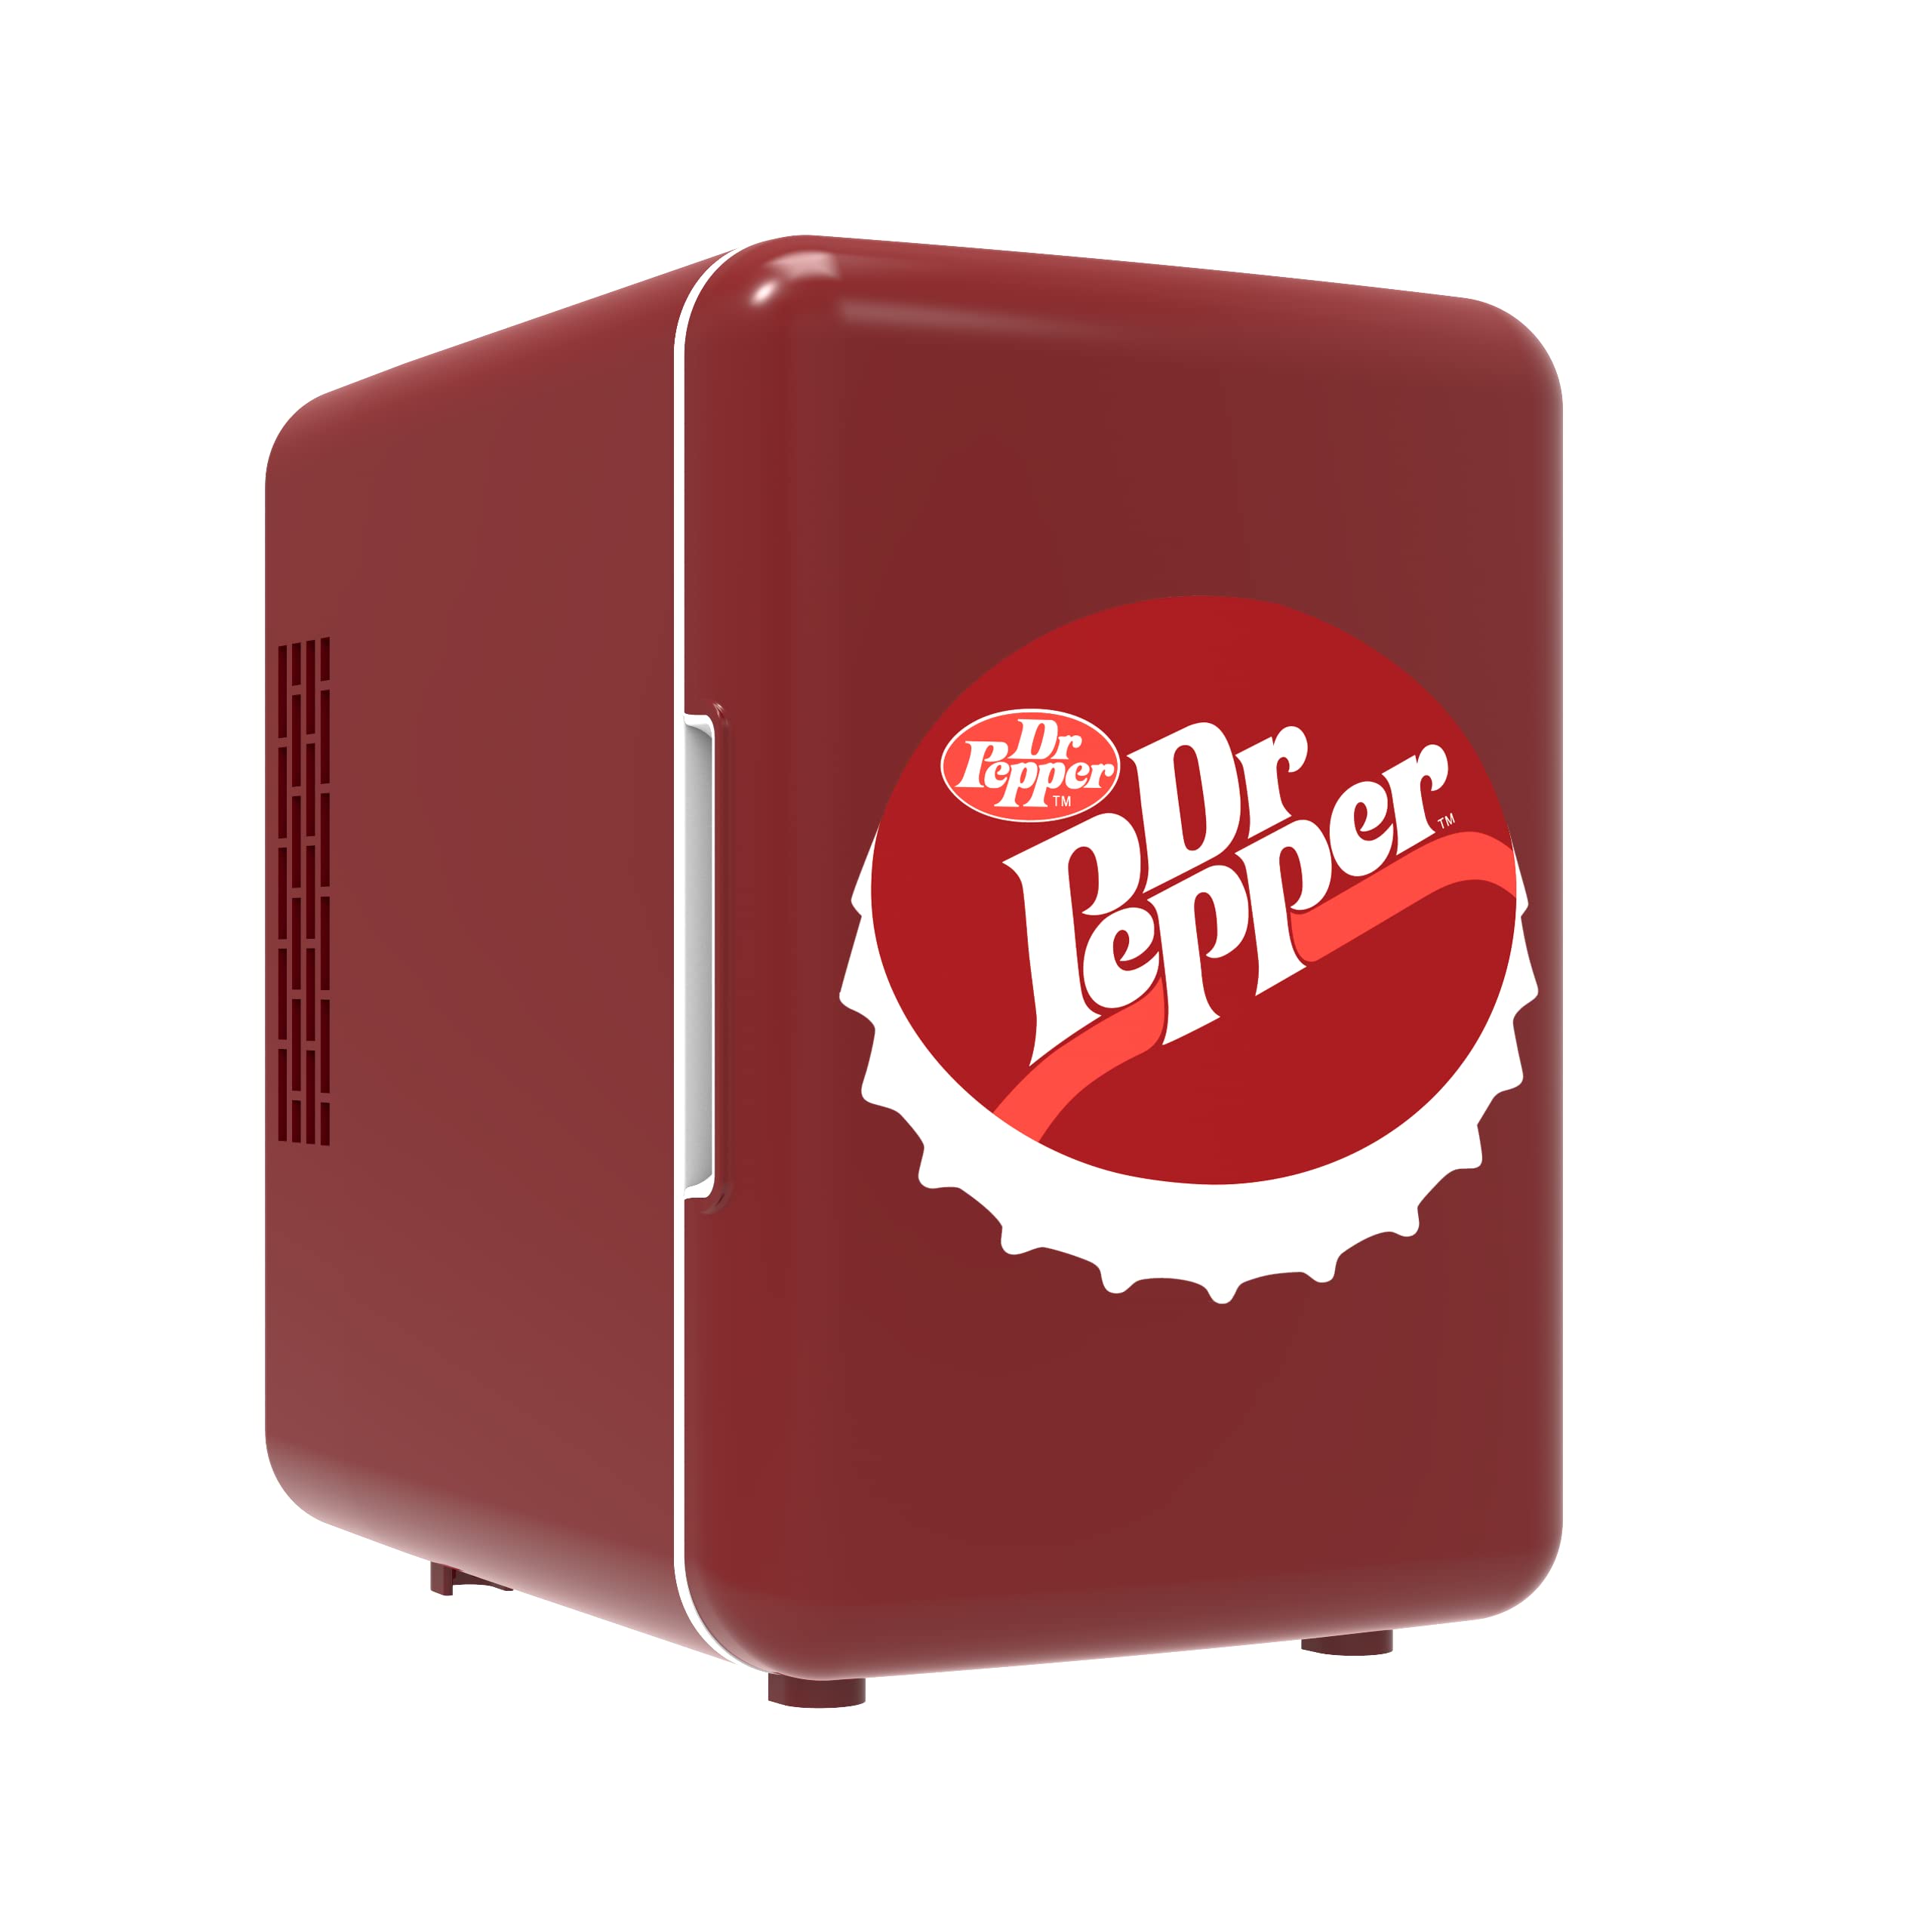 CURTIS MIS153DRP Dr. Pepper Retro Mini Portable Compact Personal Fridge Cooler, 4 Liter Capacity, 6 Cans, Makeup, Skincare, Freon-Free & Eco Friendly, Maroon